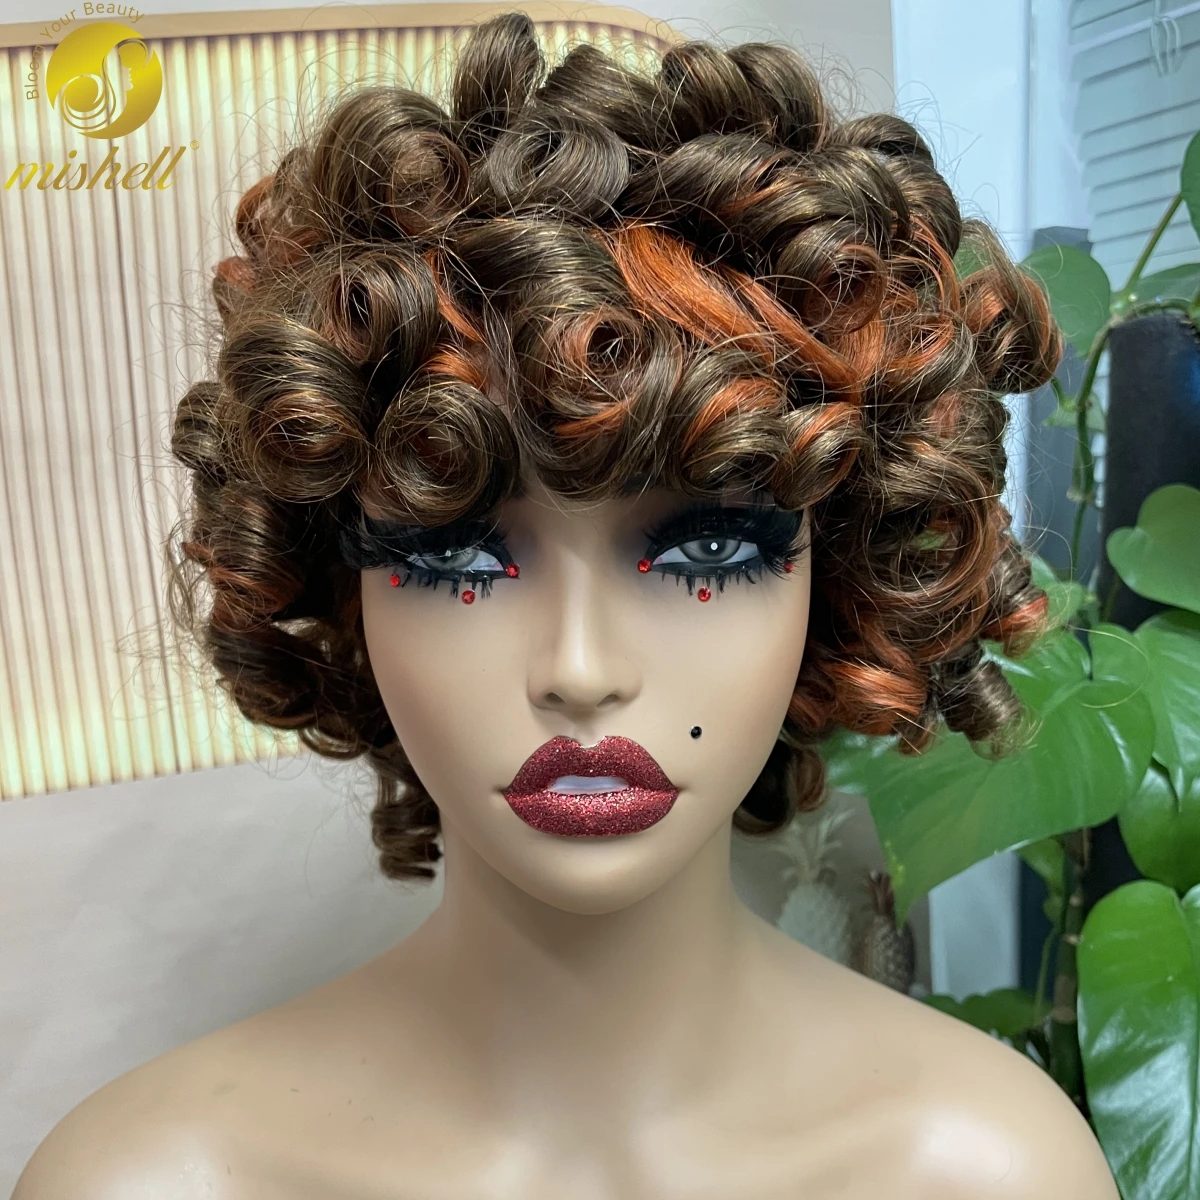 

200% Density Full Machine Made Wigs Afro Short Kinky Curly Bouncy Curly Human Hair Wig With Bangs 6 Inches For Black Women 4-350